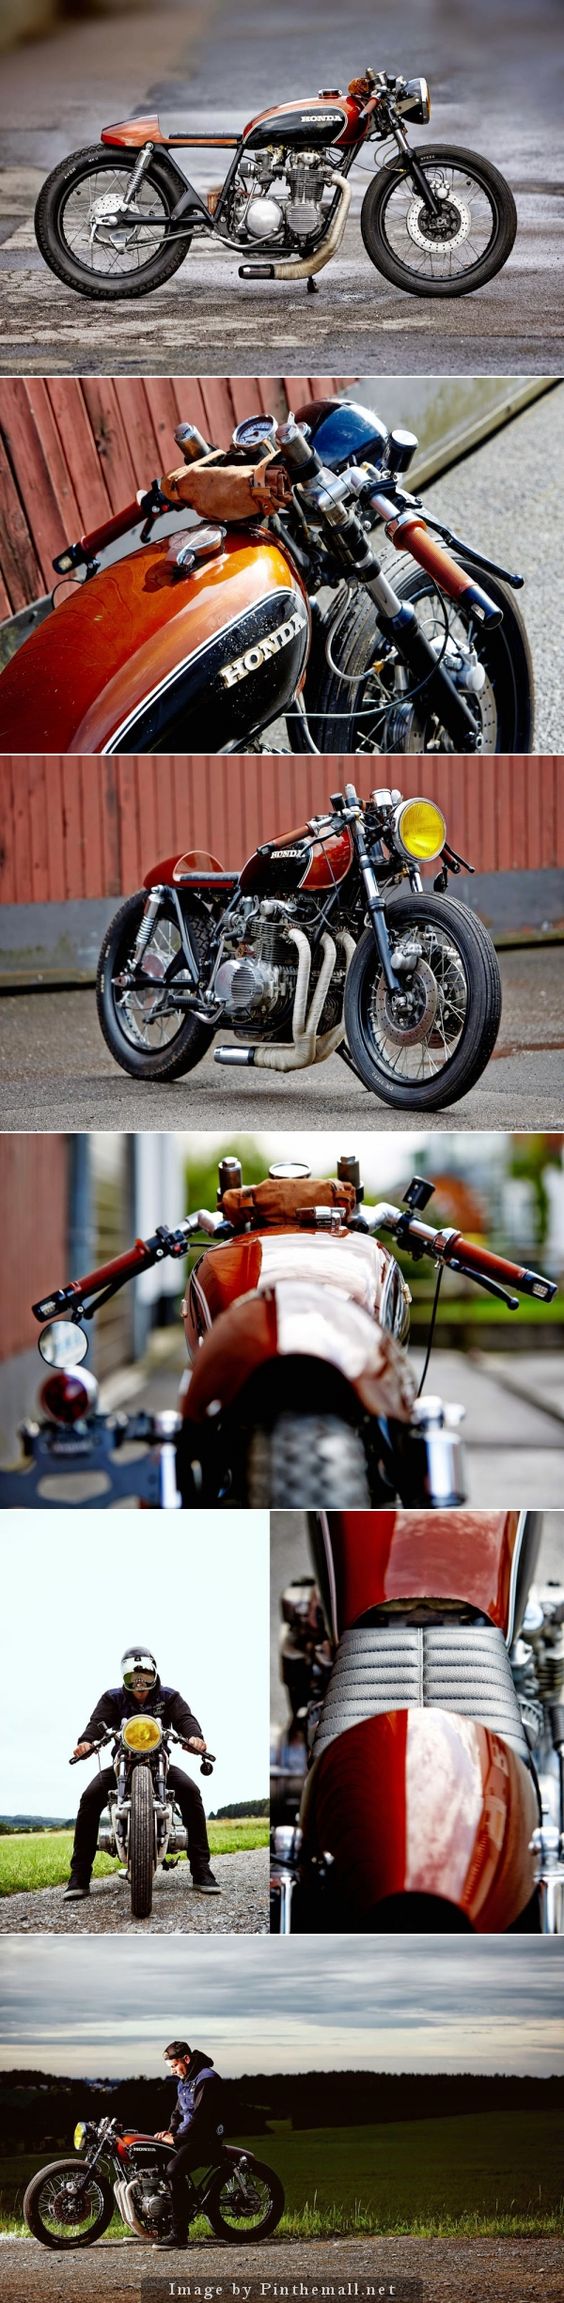 For Motorcycle fans: Fate Customs Honda CB550 Click to read the full story